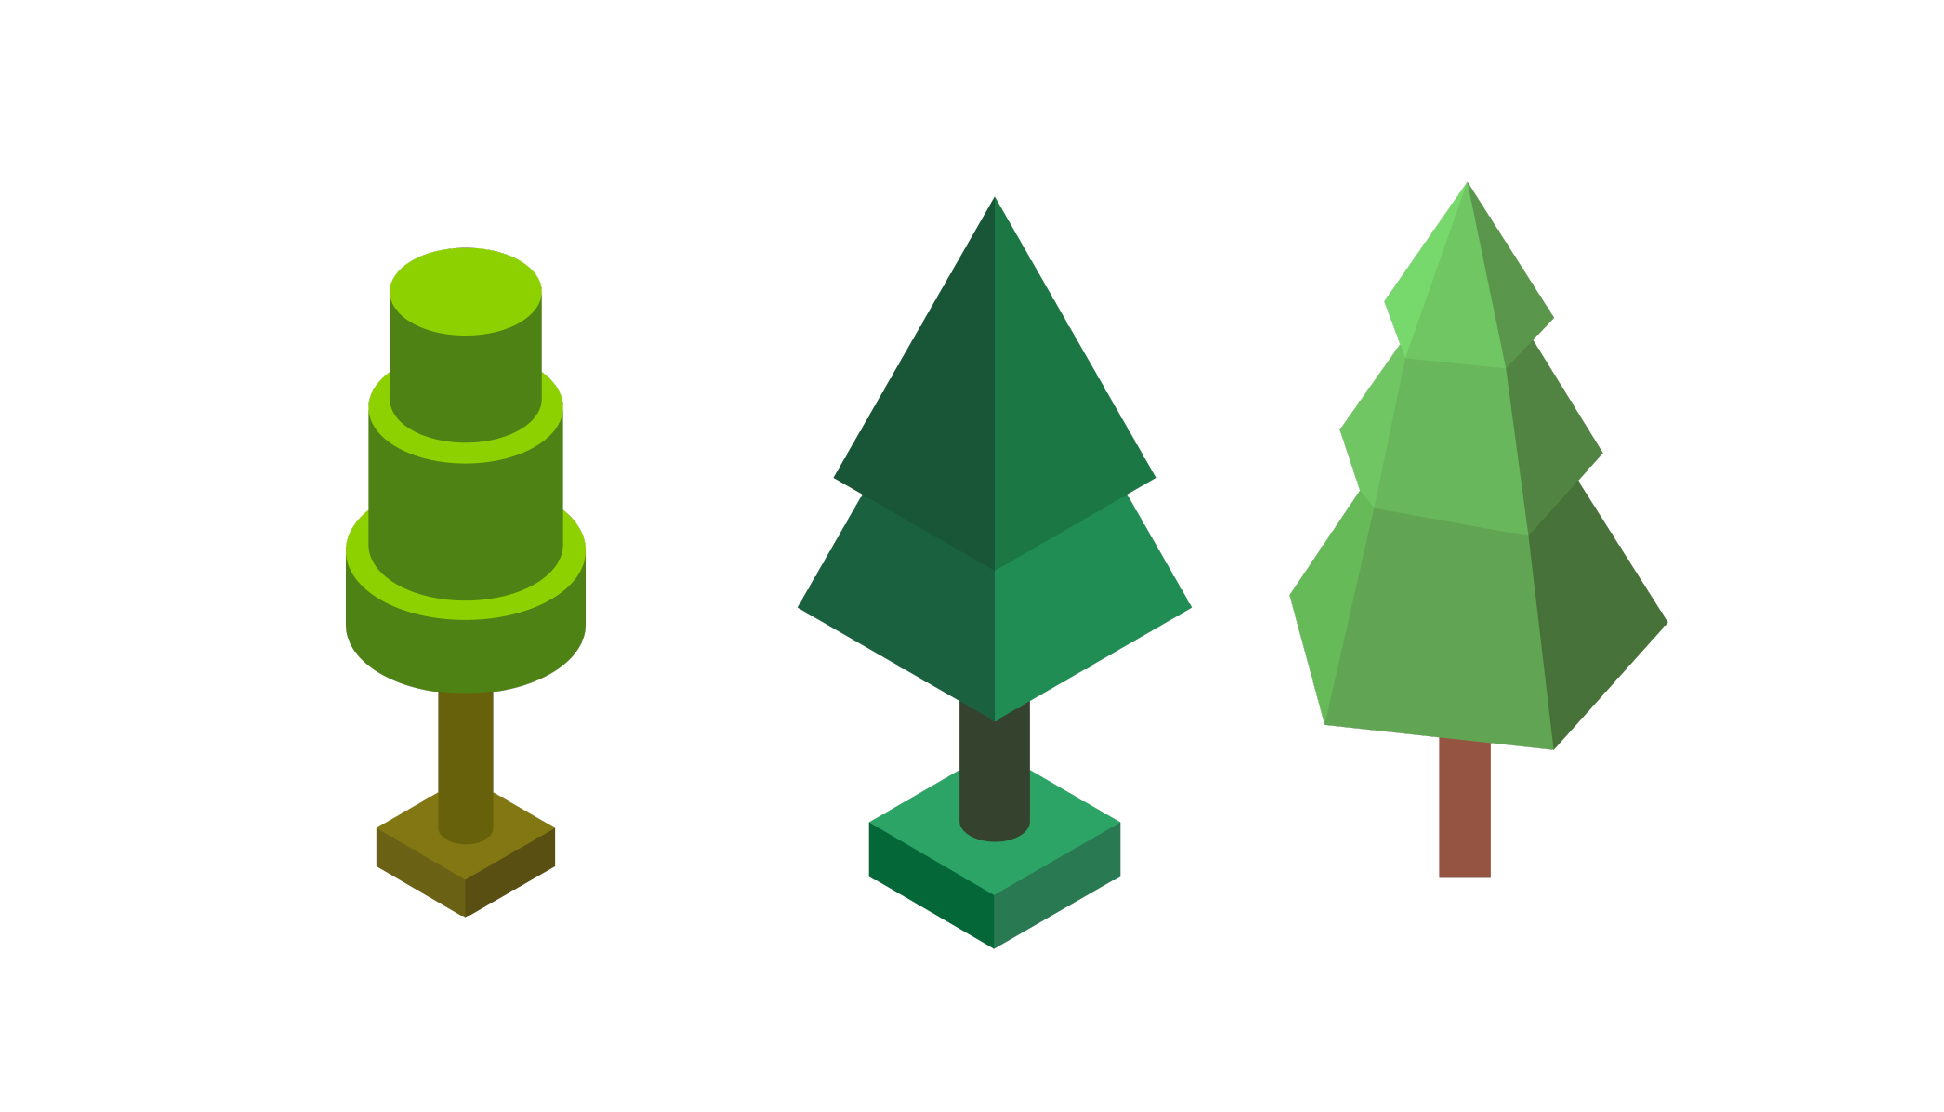 Isometric Trees Illustration Pack - 3 Nature Illustrations | SVG, PNG ...